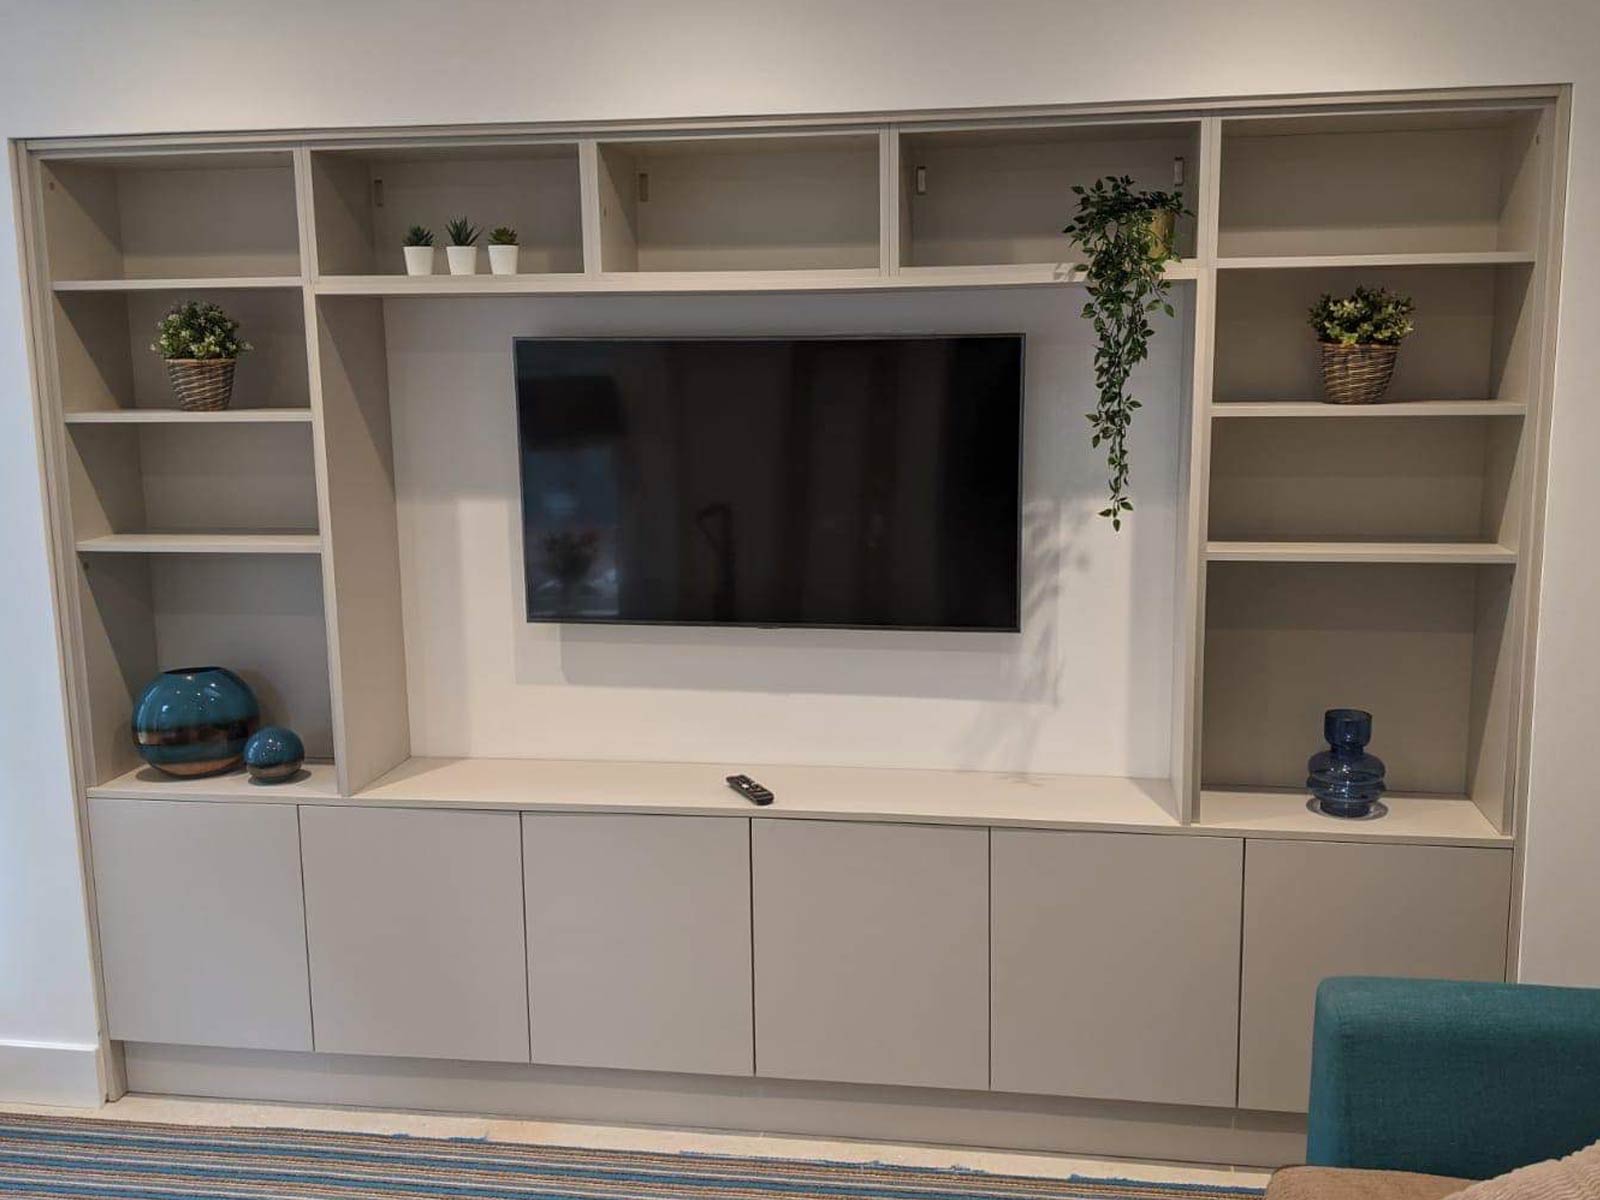 TV Media wall shelves used as a kitchen space-saving solution